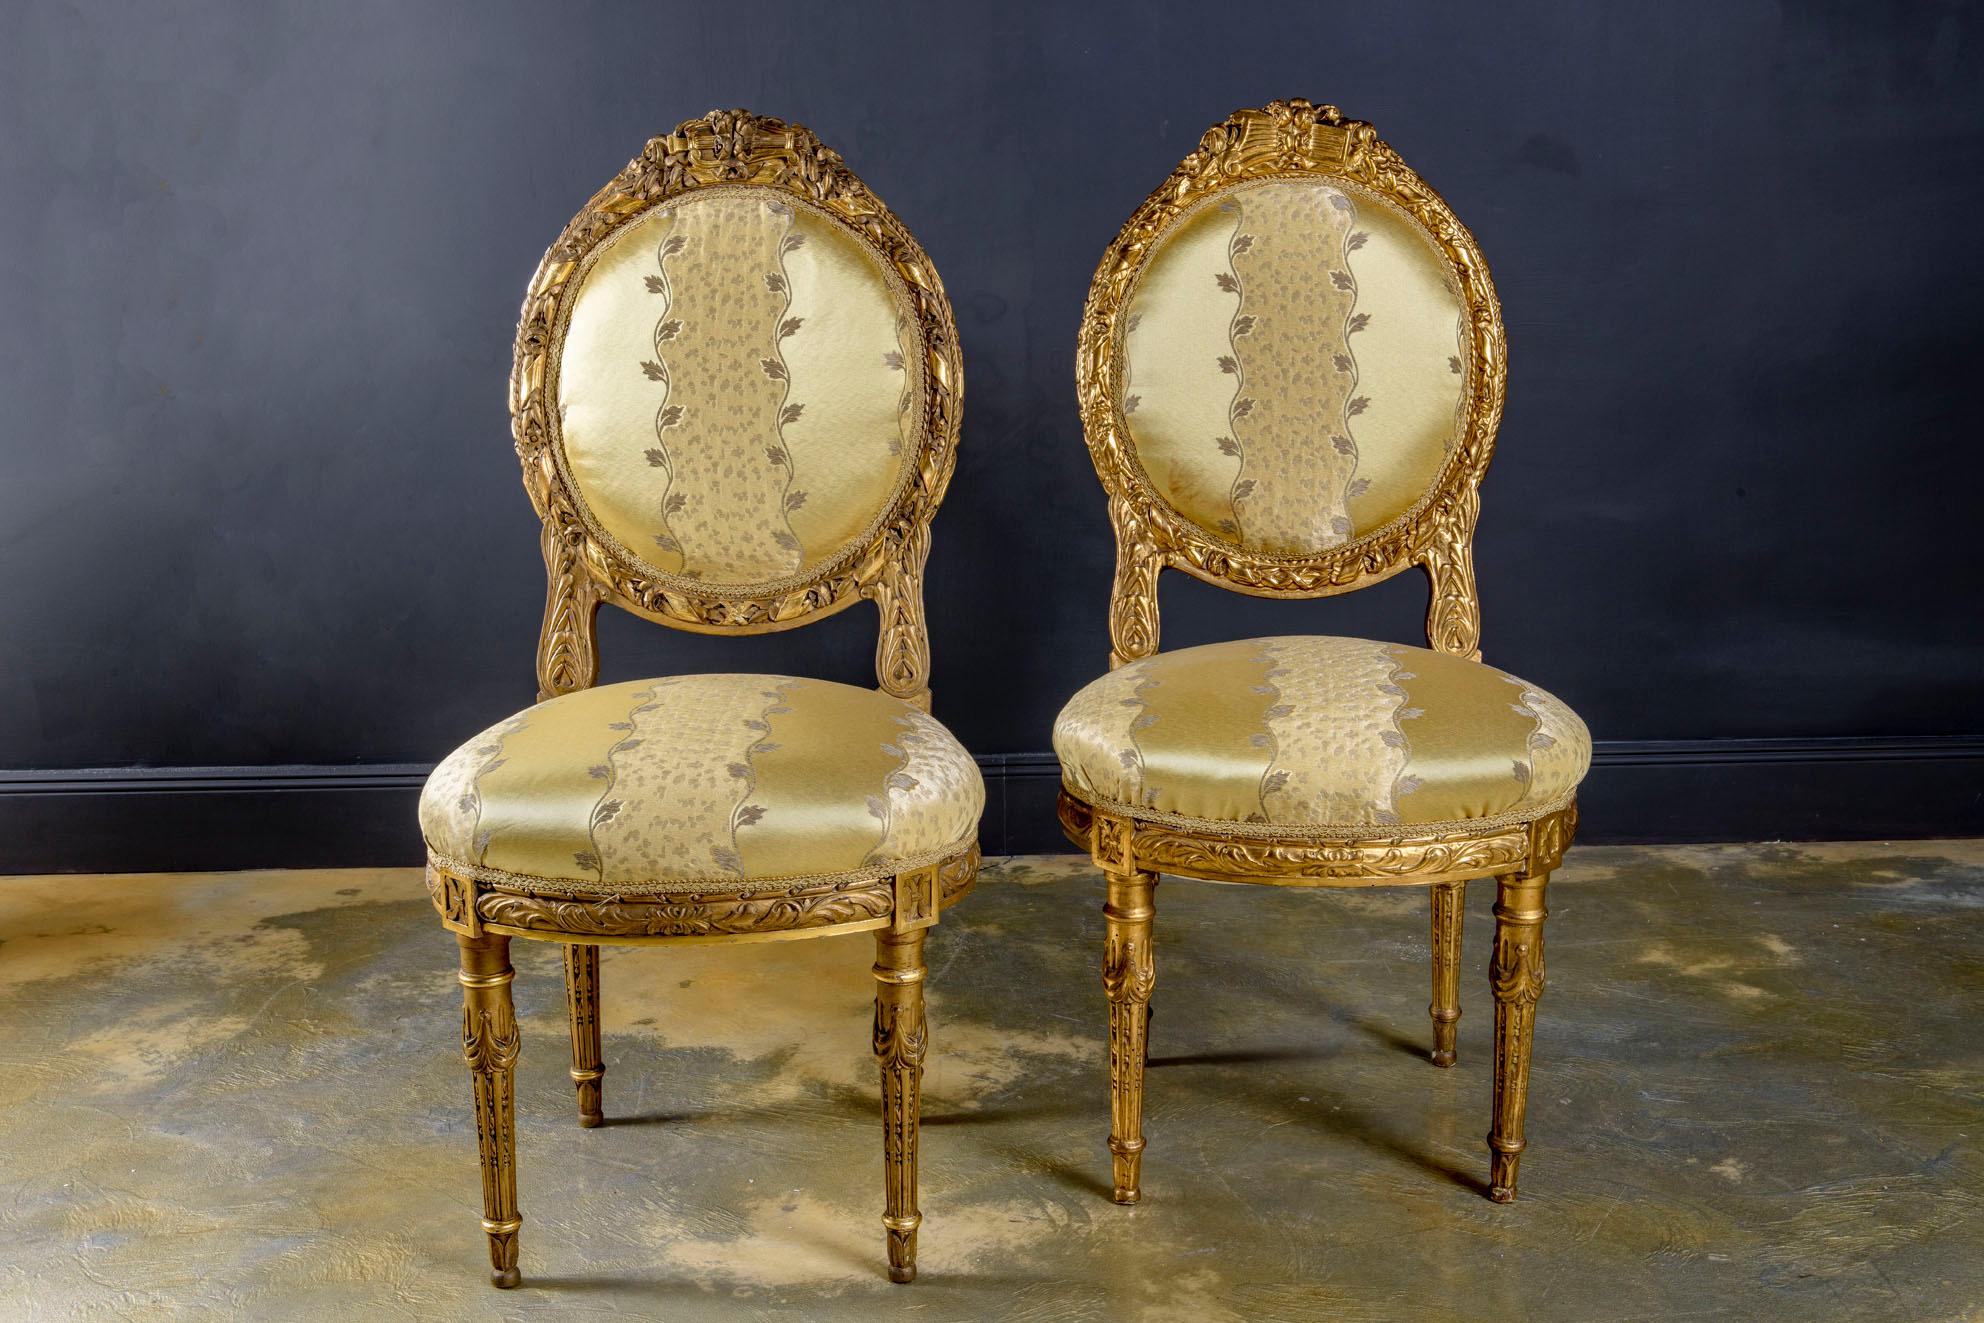 Pair of very well proportioned, elegant and chic Louis XVI style wood and gold leaf gilded chairs created very probably by Maison Jansen. 
Each chair with curved oval-shaped padded back and seat, reupholstered in prestigious very high quality Damask